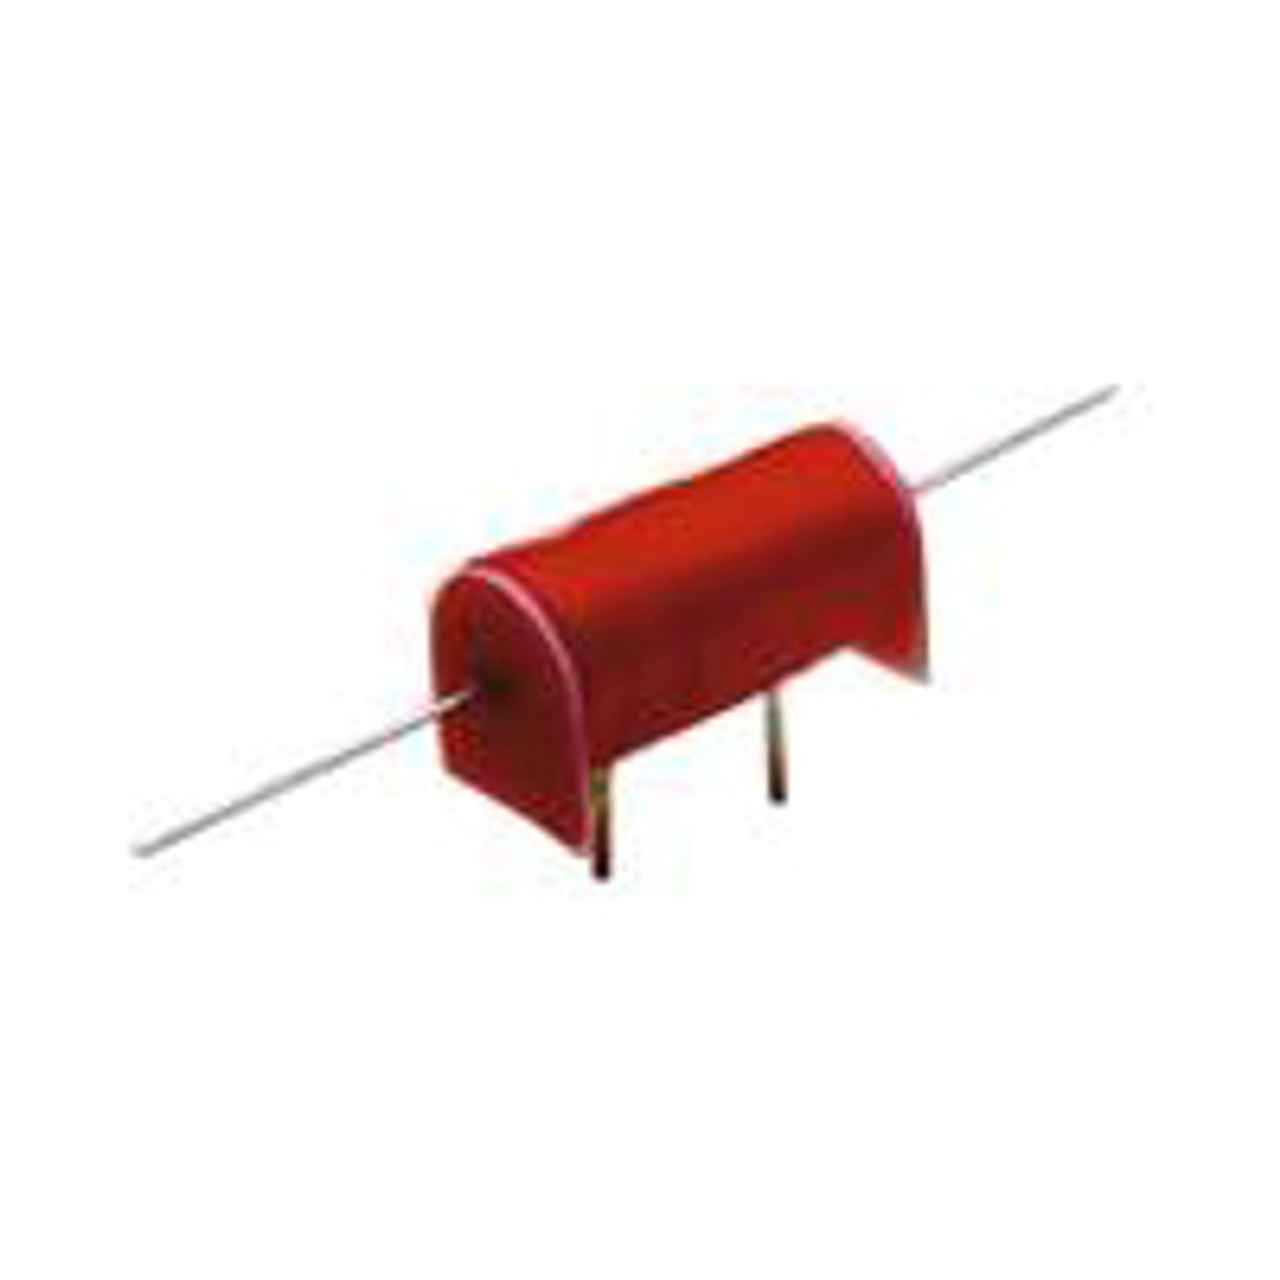 Coto 1248-0010 Reed Relays